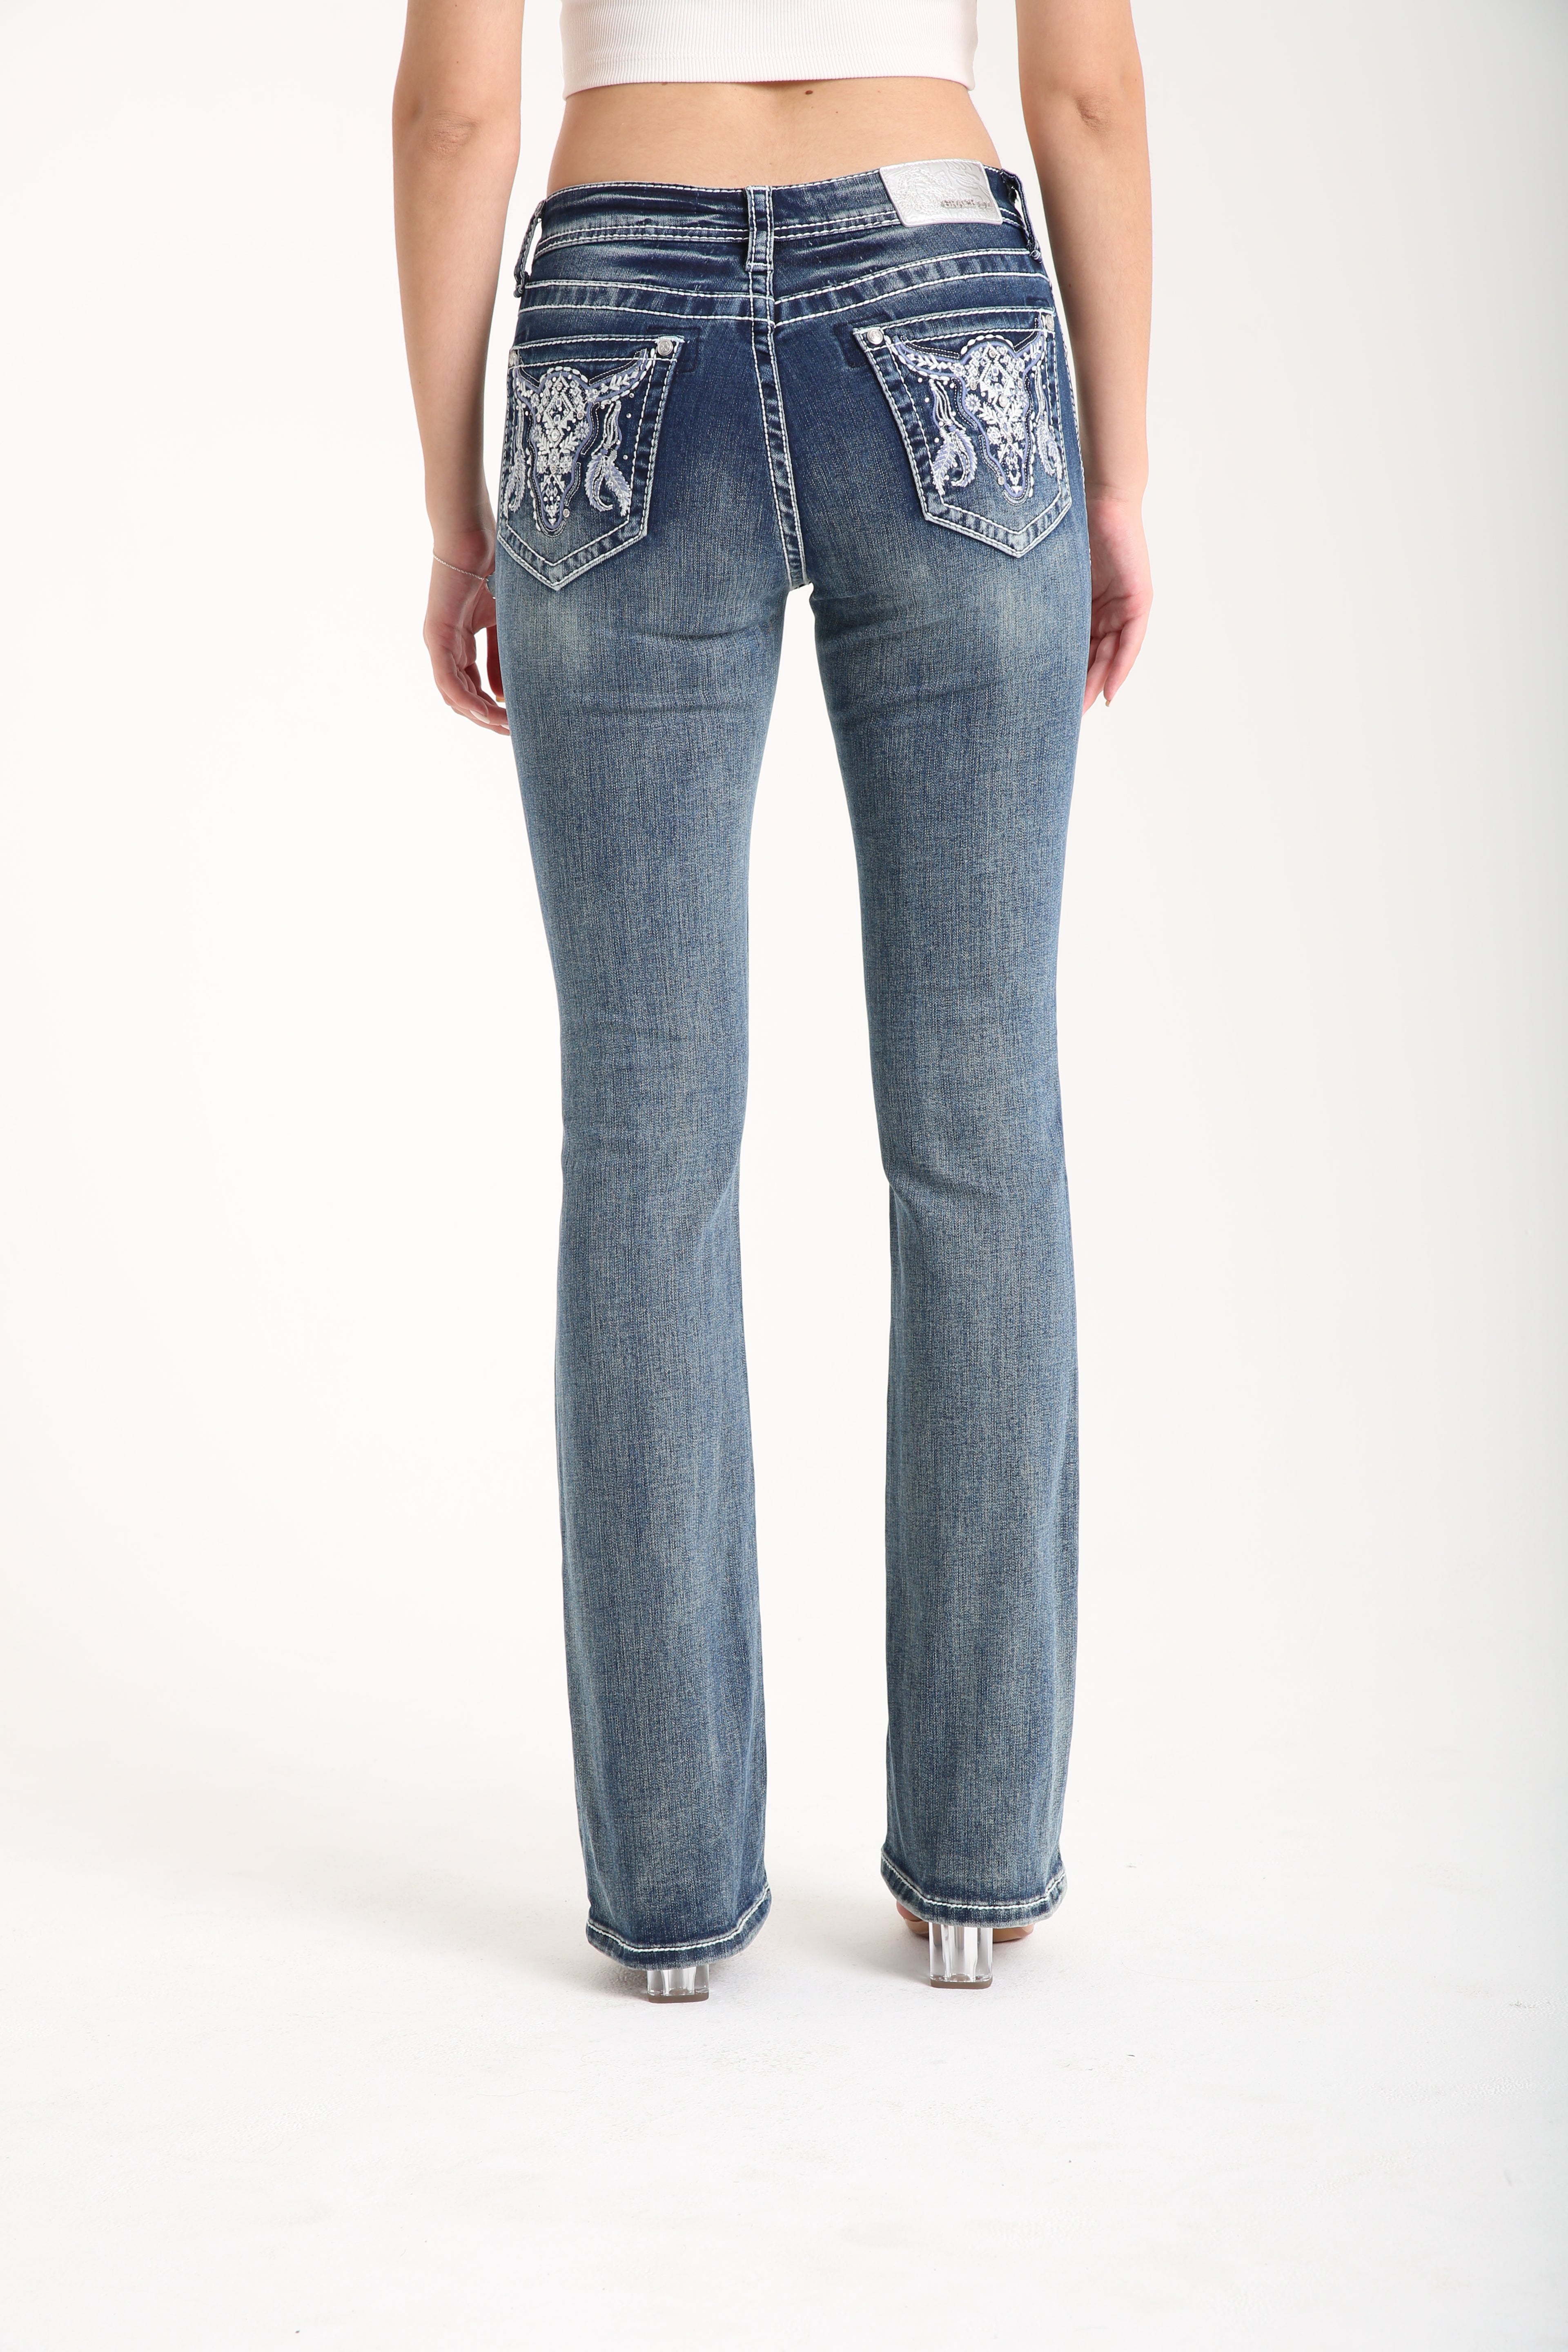 Steer Head Modify Embellished Mid Rise Bootcut Jeans